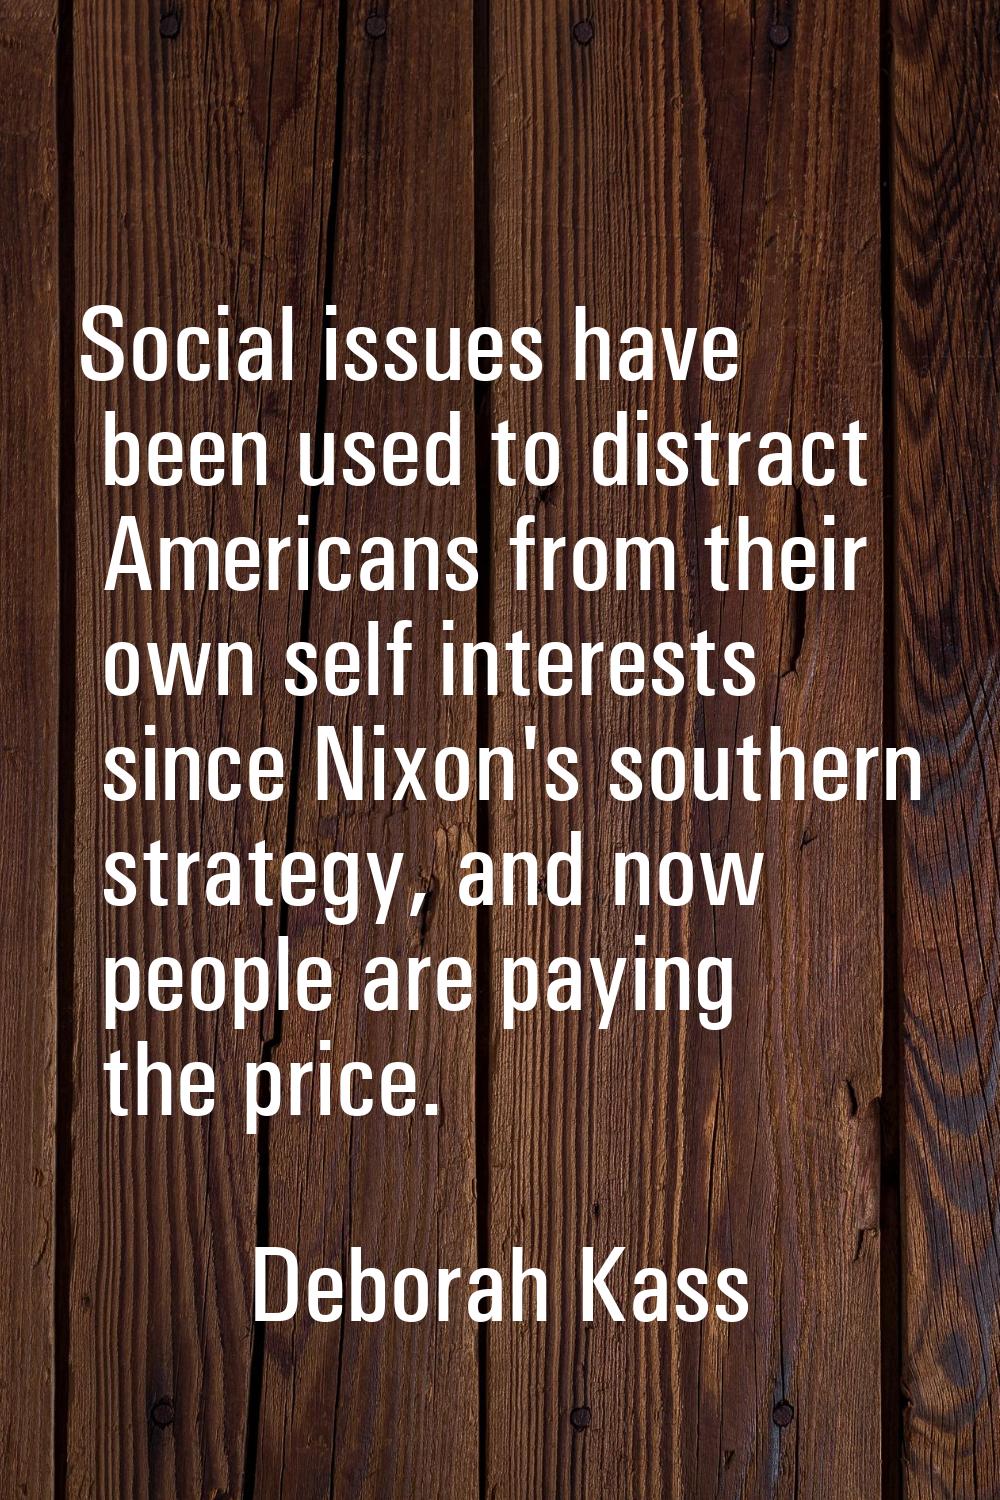 Social issues have been used to distract Americans from their own self interests since Nixon's sout